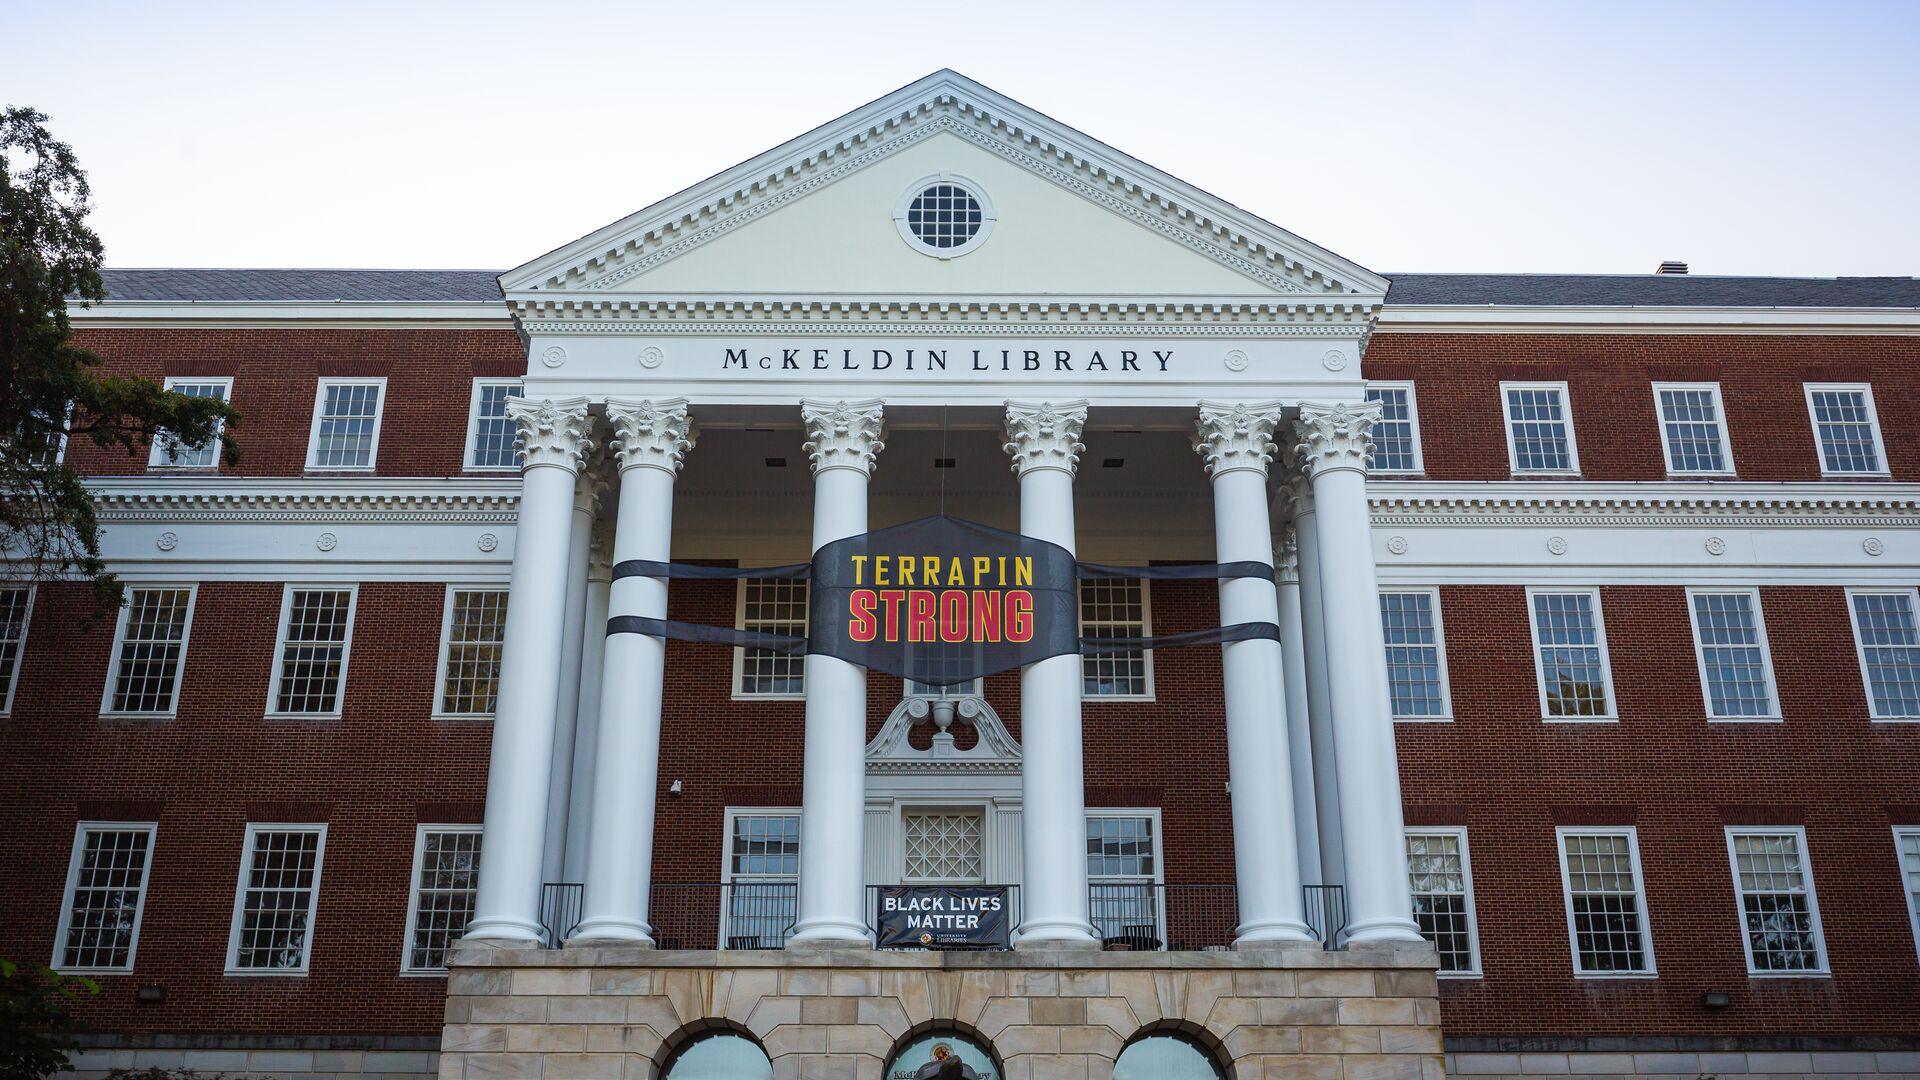 Terrapin Strong "mask" banner on the front exterior of McKeldin Library at dusk; Testudo statue in the foreground.